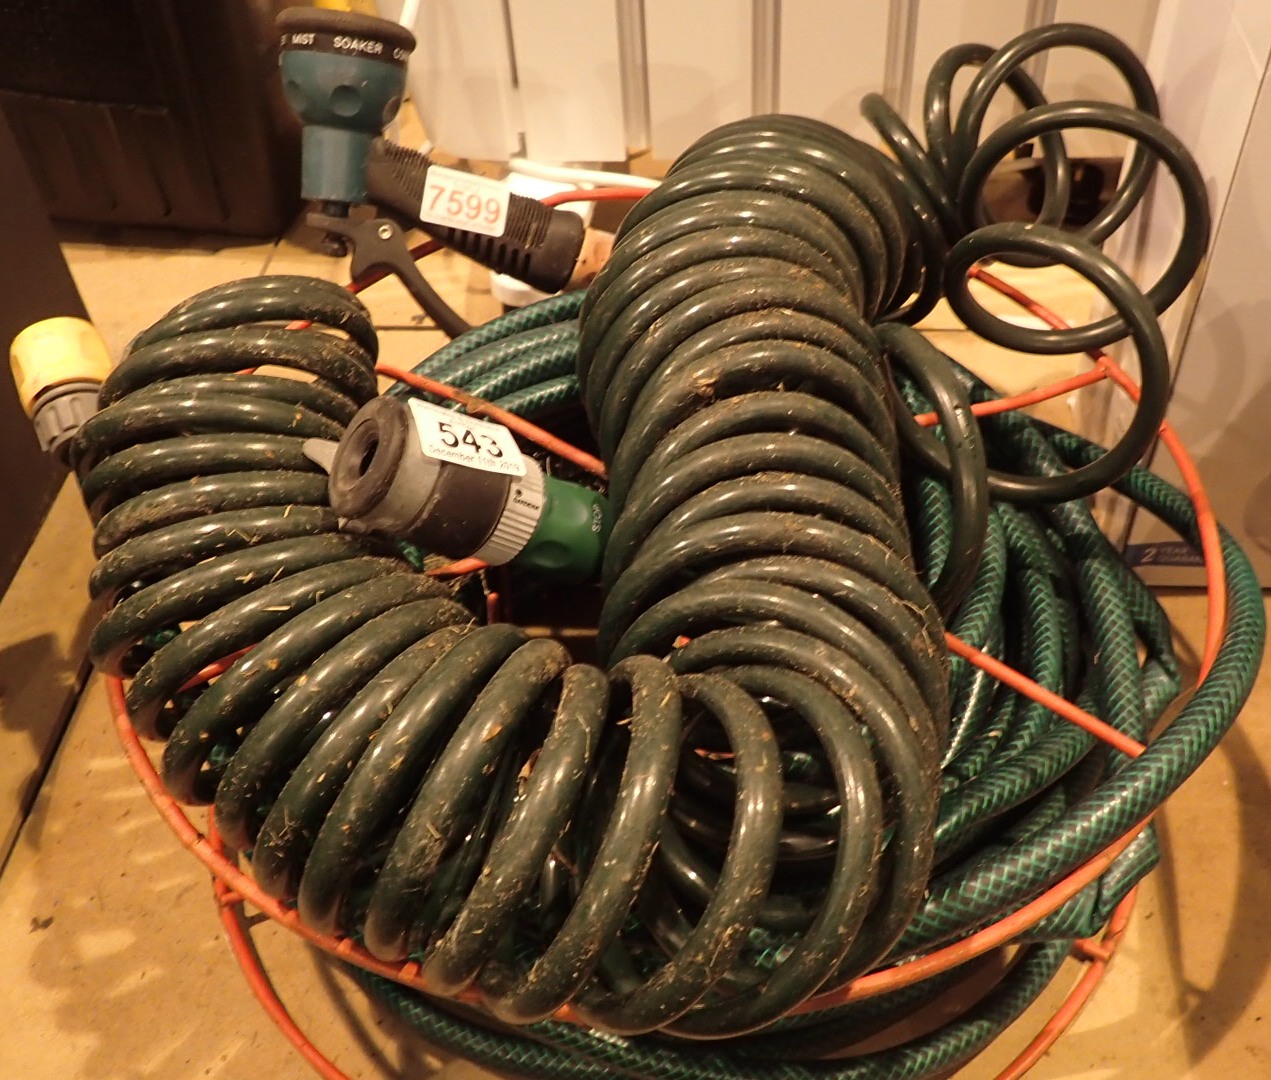 Two garden hose pipes one on reel with attachments